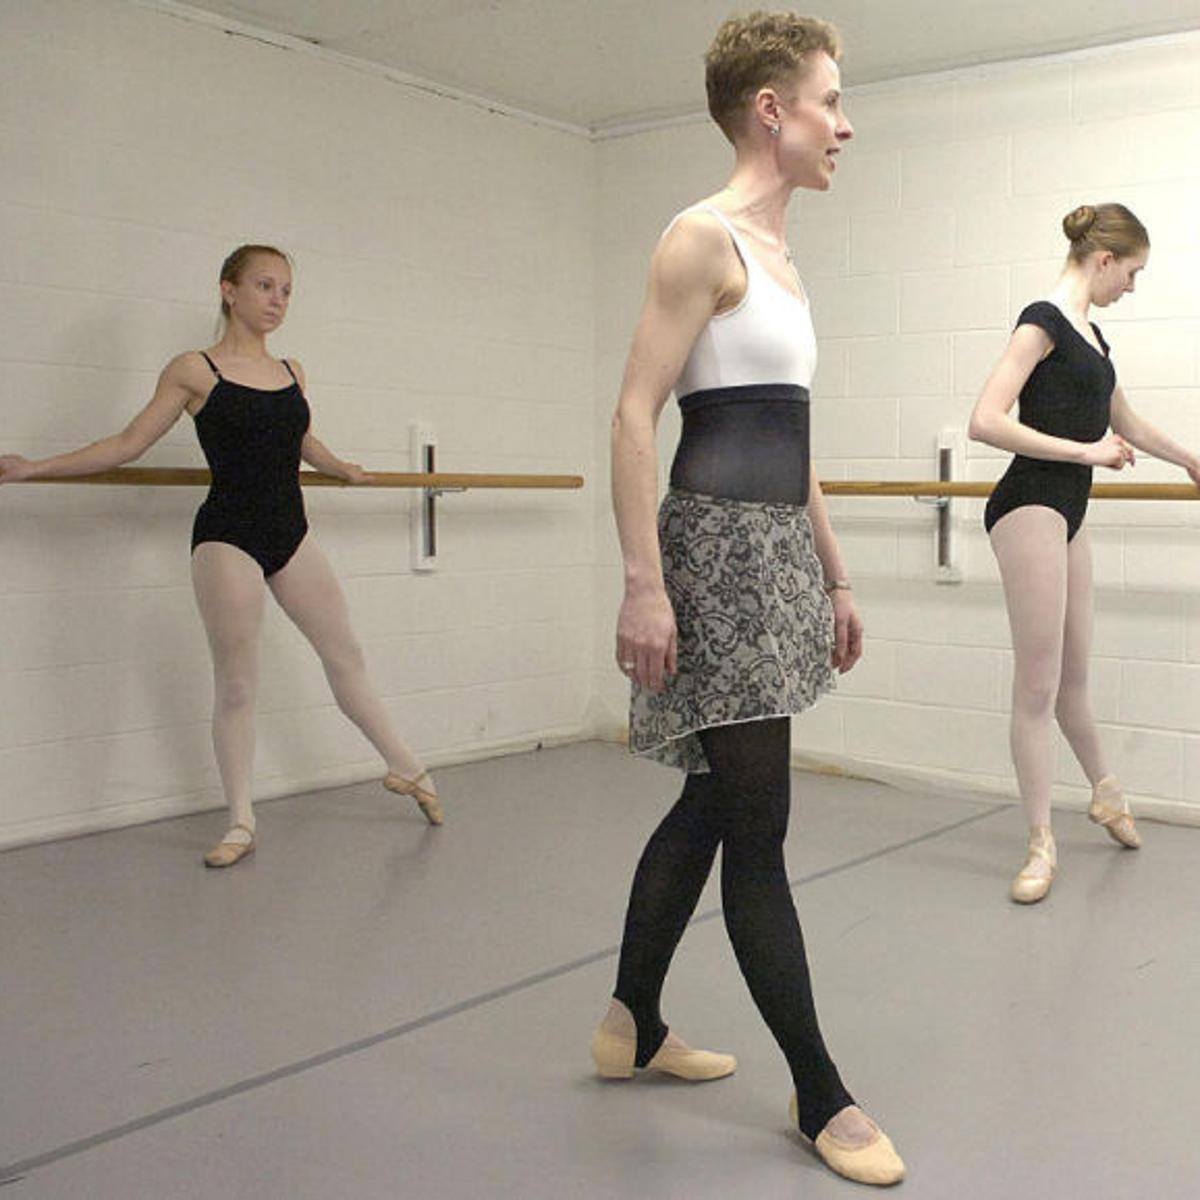 Ballet instructor coaches students to strive for excellence